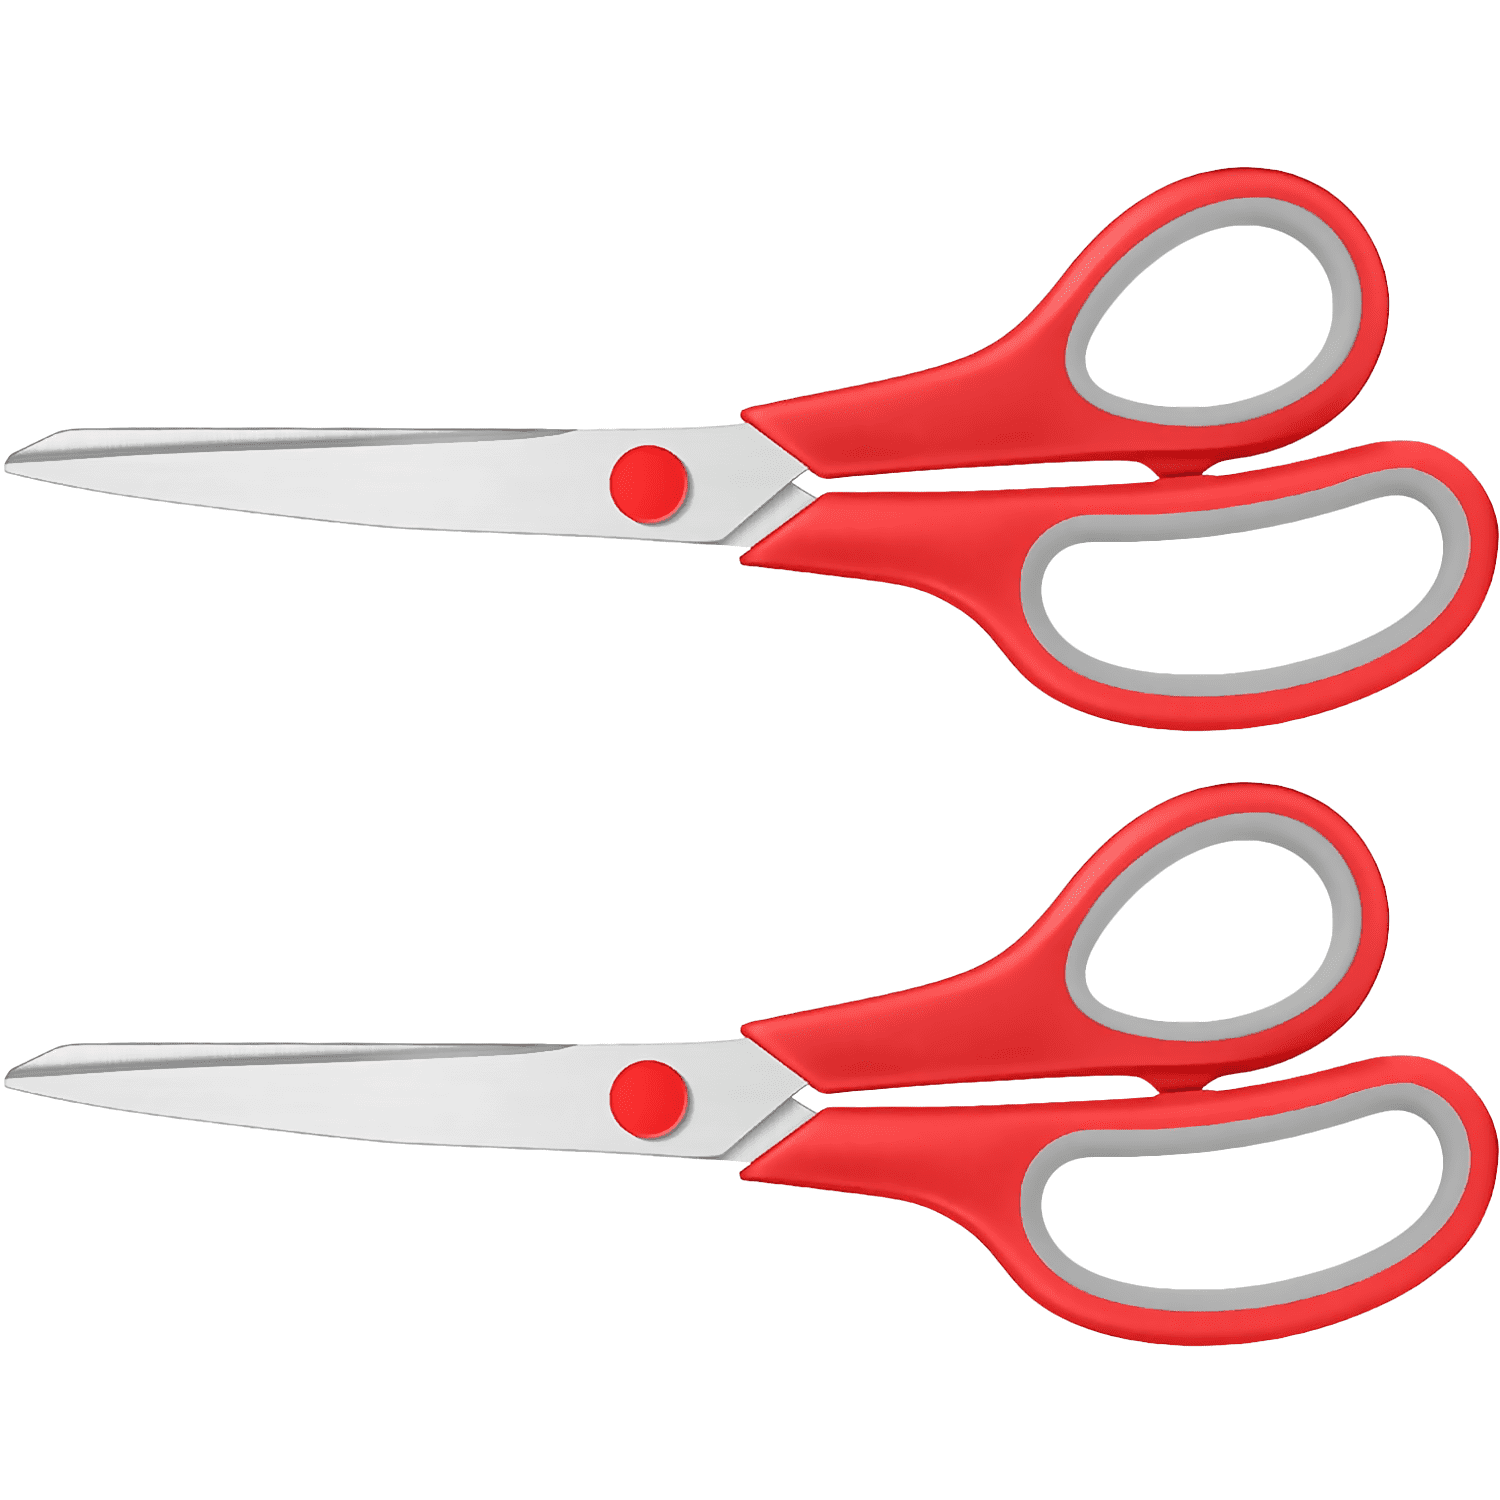 TONMA Scissors All Purpose [Made in Japan] 8.5 Sharp Office Scissors  Japanese SK4 Stainless Steel Craft Scissors for School Students Office Work  Home Arts Crafting Cutting, Ergonomic Right Handled - Yahoo Shopping